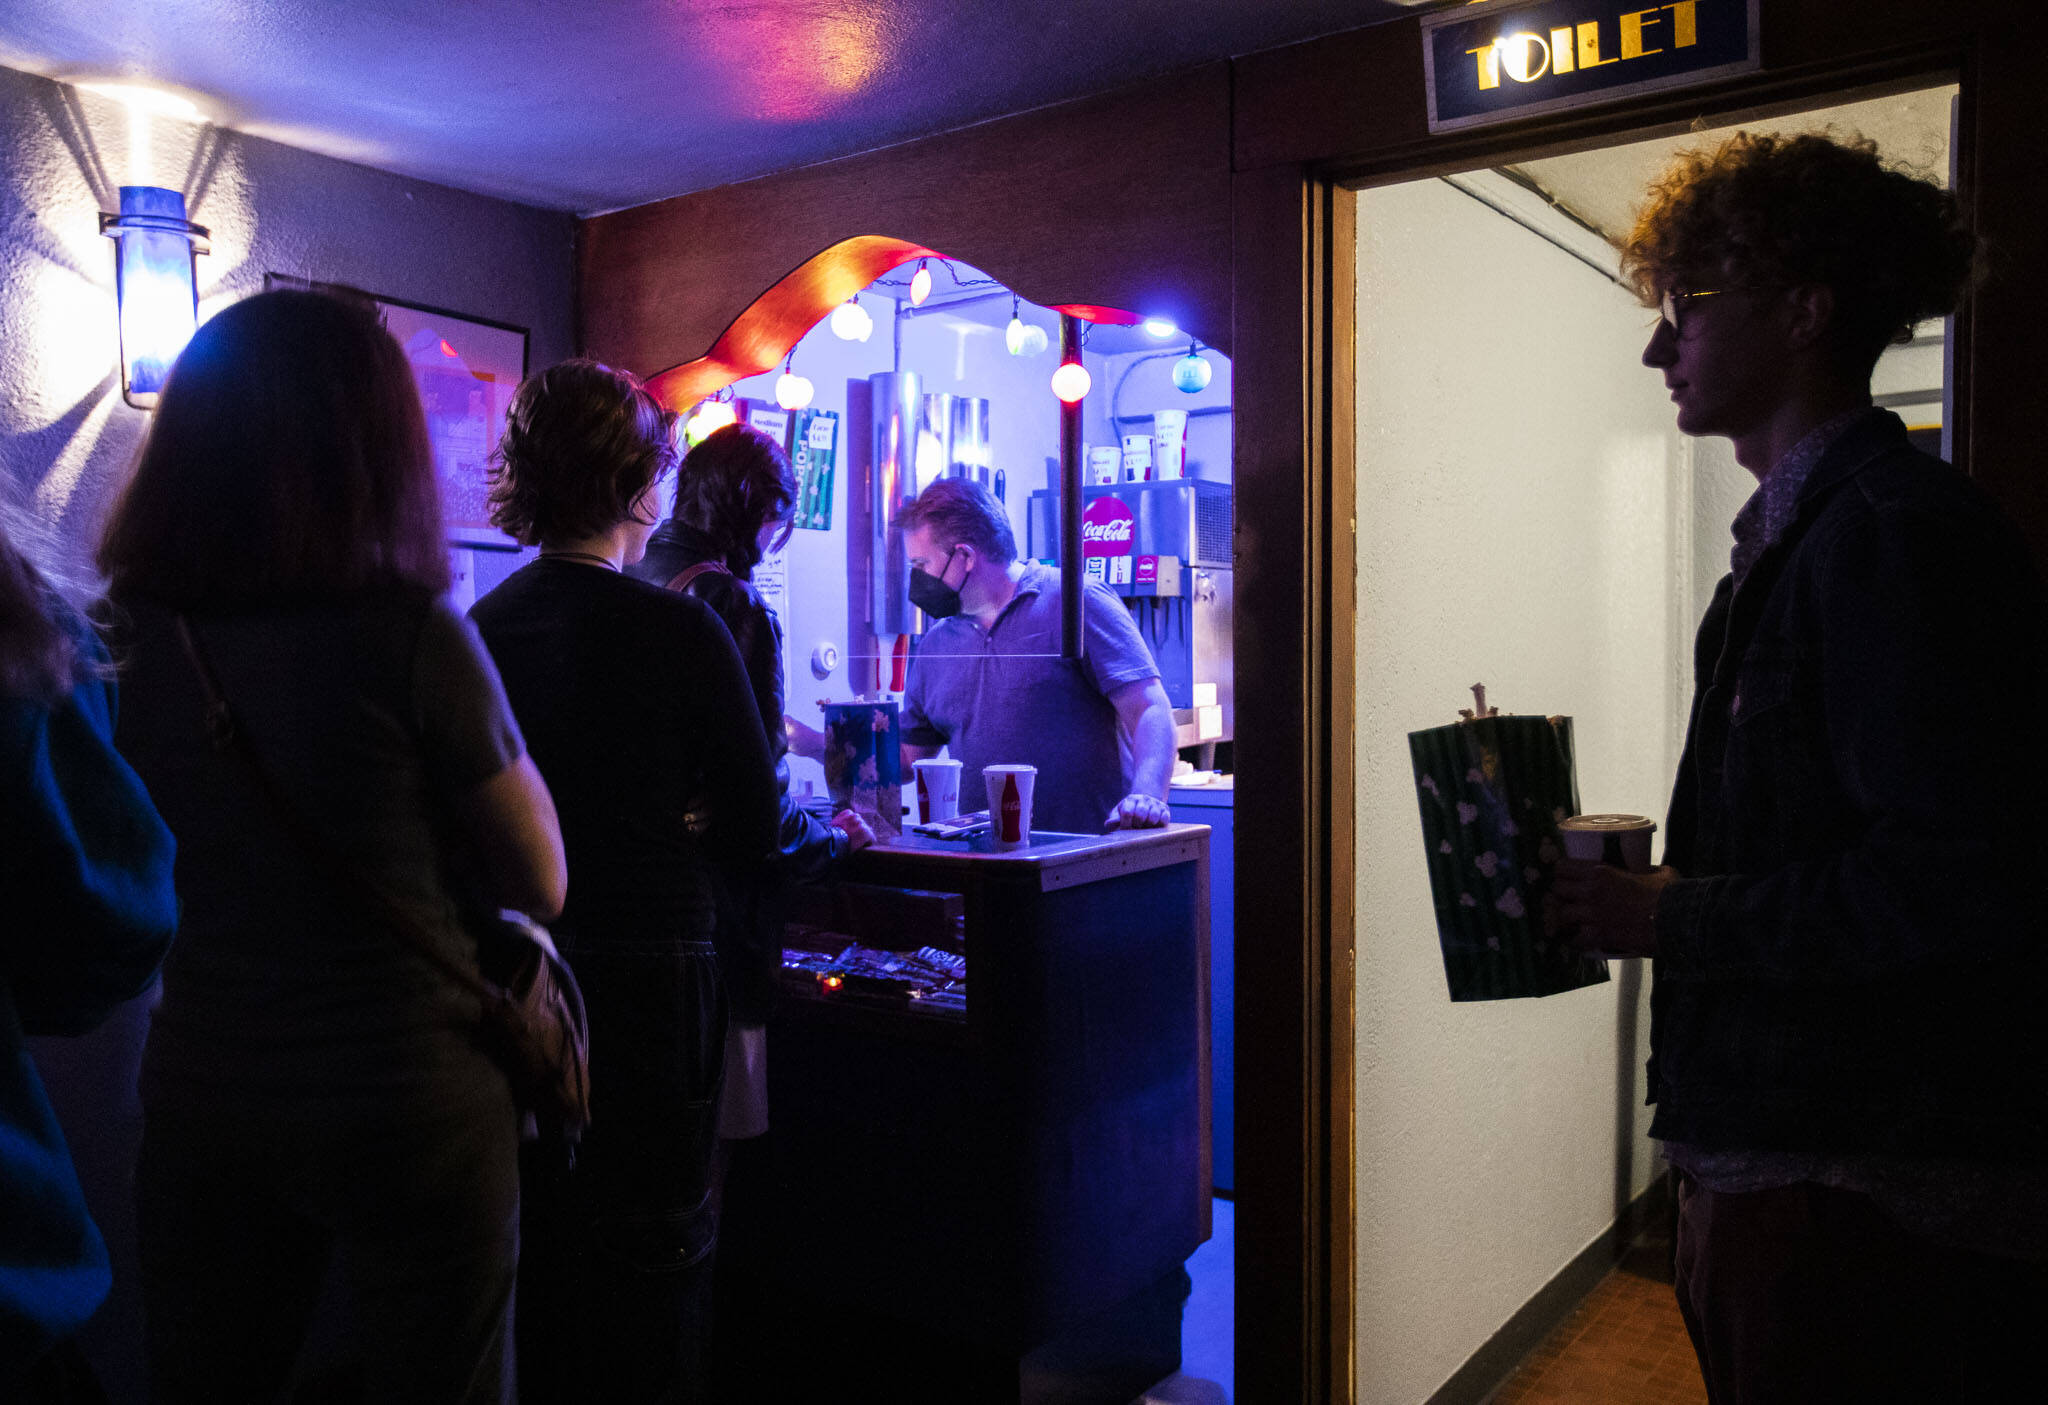 Patrons line up for order popcorn, soda, candy and other movie theater snacks. (Olivia Vanni / The Herald)